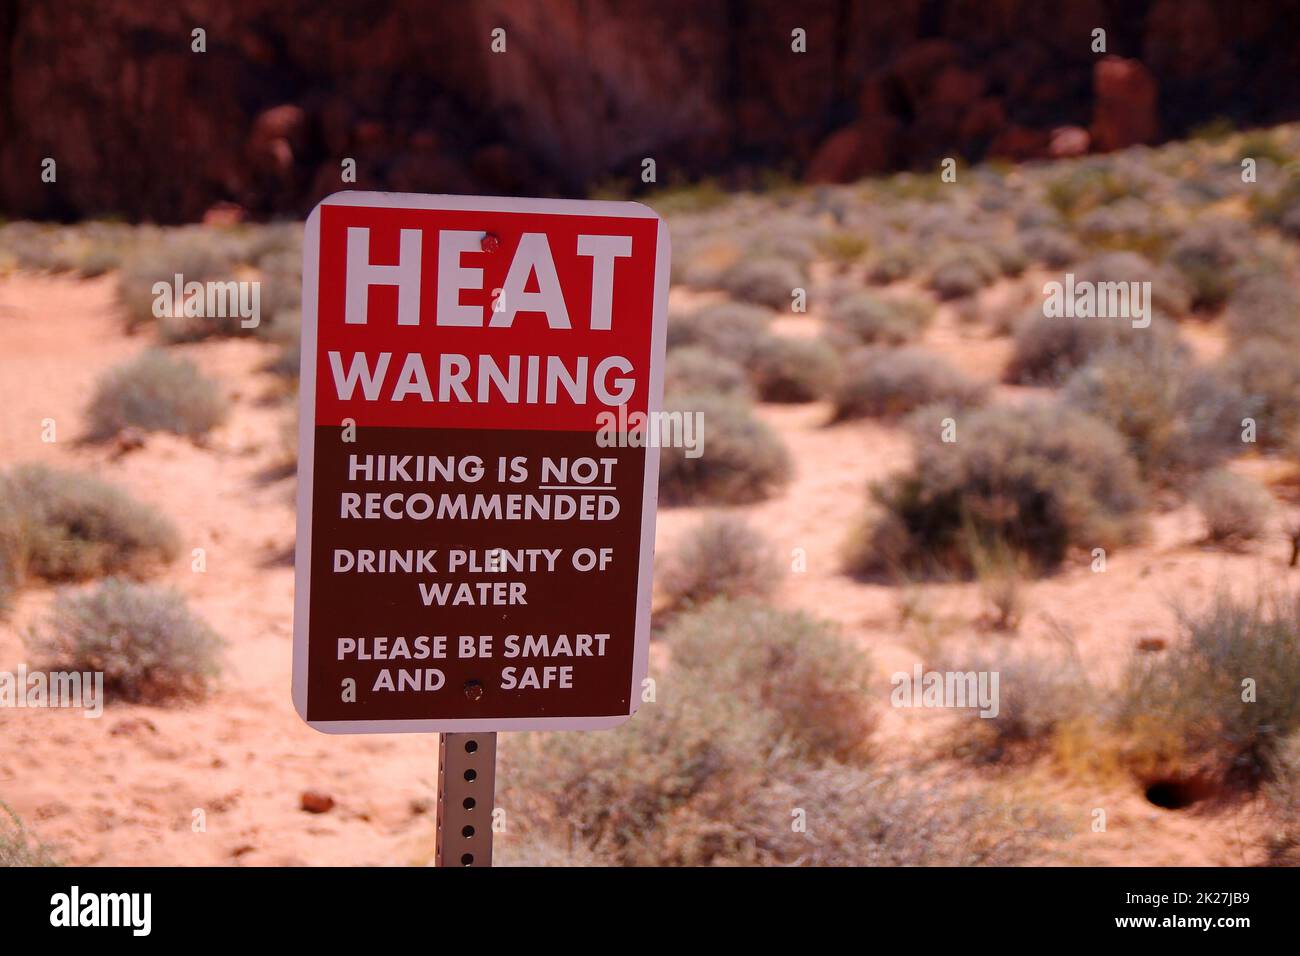 Heat Warning, Hiking is not recommended, drink plenty of water, please be smart and safe Stock Photo